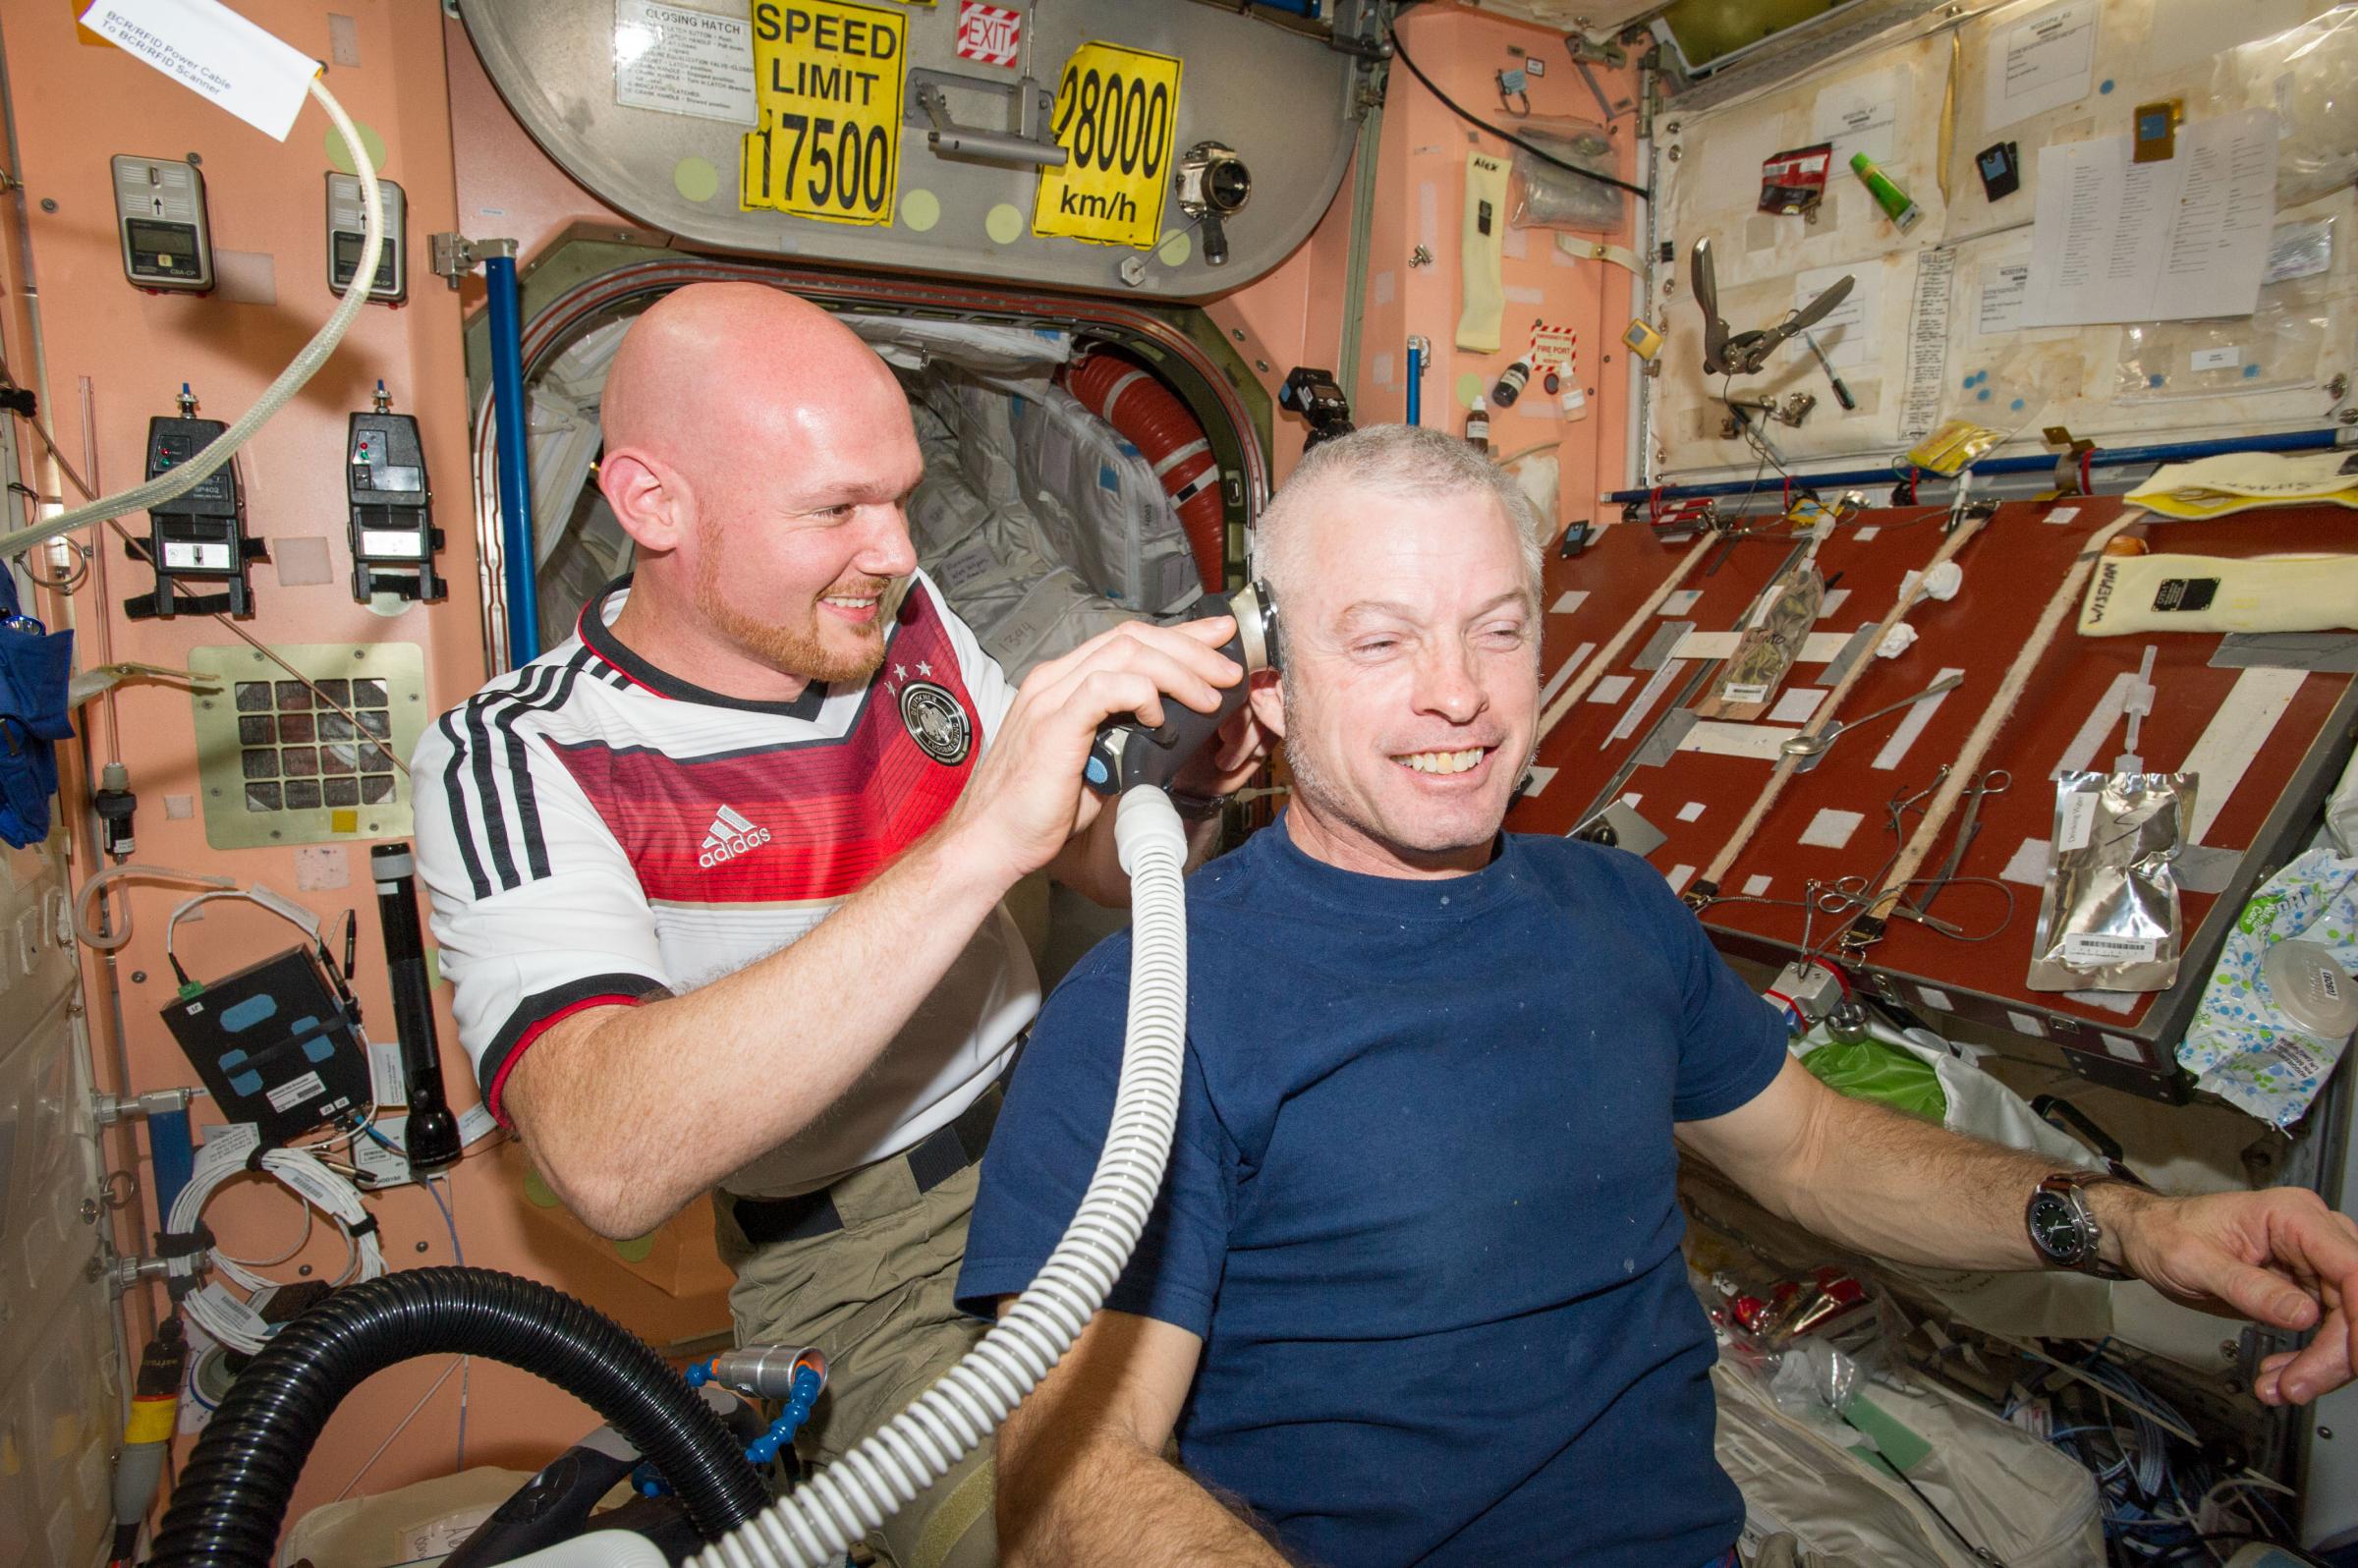 Astronaut Alexander Gerst, Expedition 40 flight engineer, shaves the head of NASA astronaut Steve Swanson in the Unity node of the International Space Station. Gerst used hair clippers fashioned with a vacuum device.